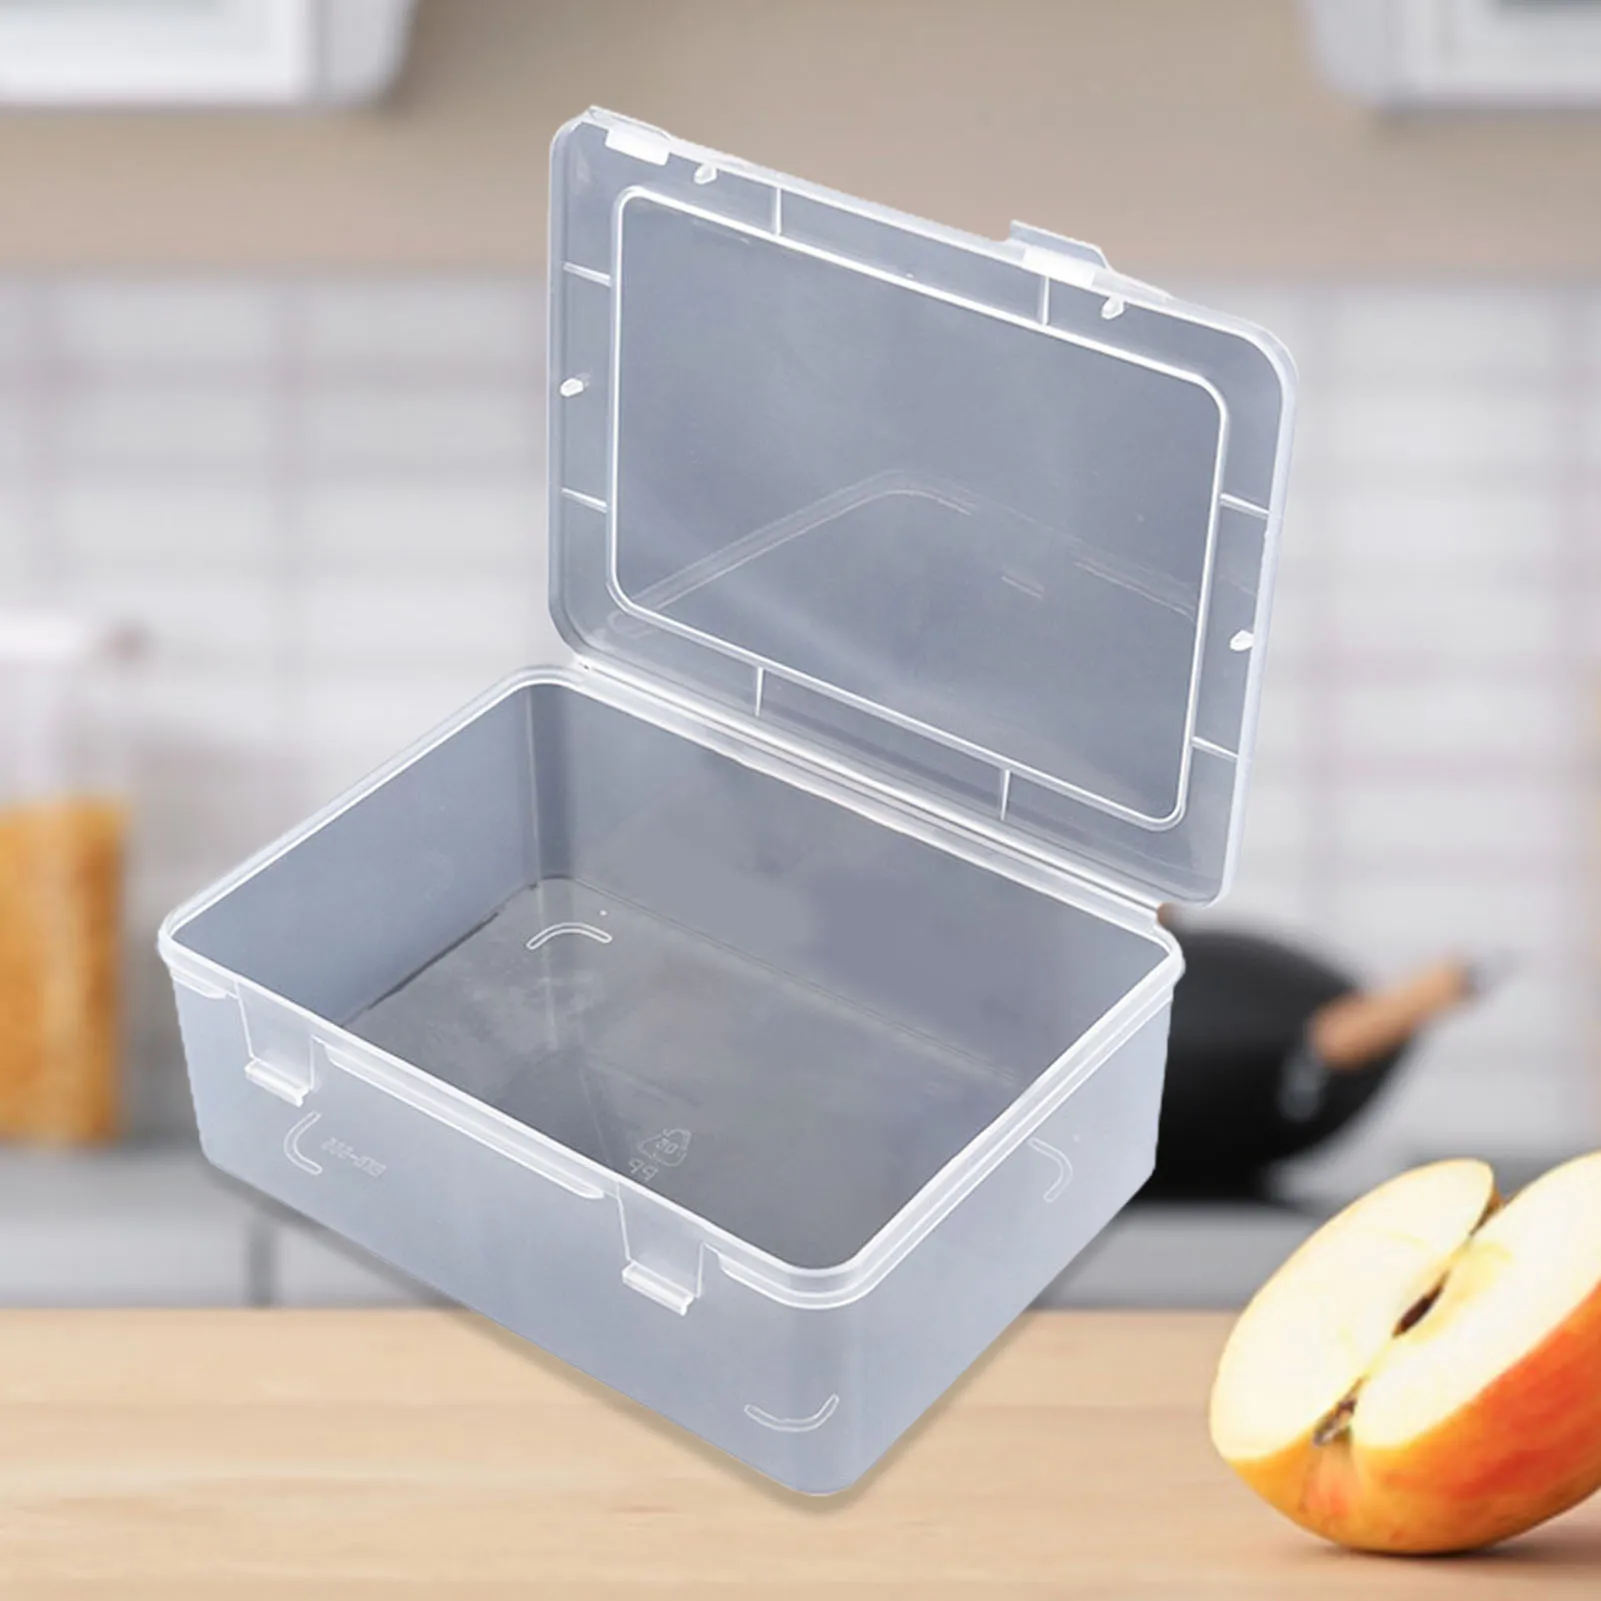 https://ae01.alicdn.com/kf/H47da80b9e1c34cacbae1c3e6a53f4fd16/Rectangle-Transparent-Large-Capacity-Plastic-Storage-Box-Container-with-Lid.jpg